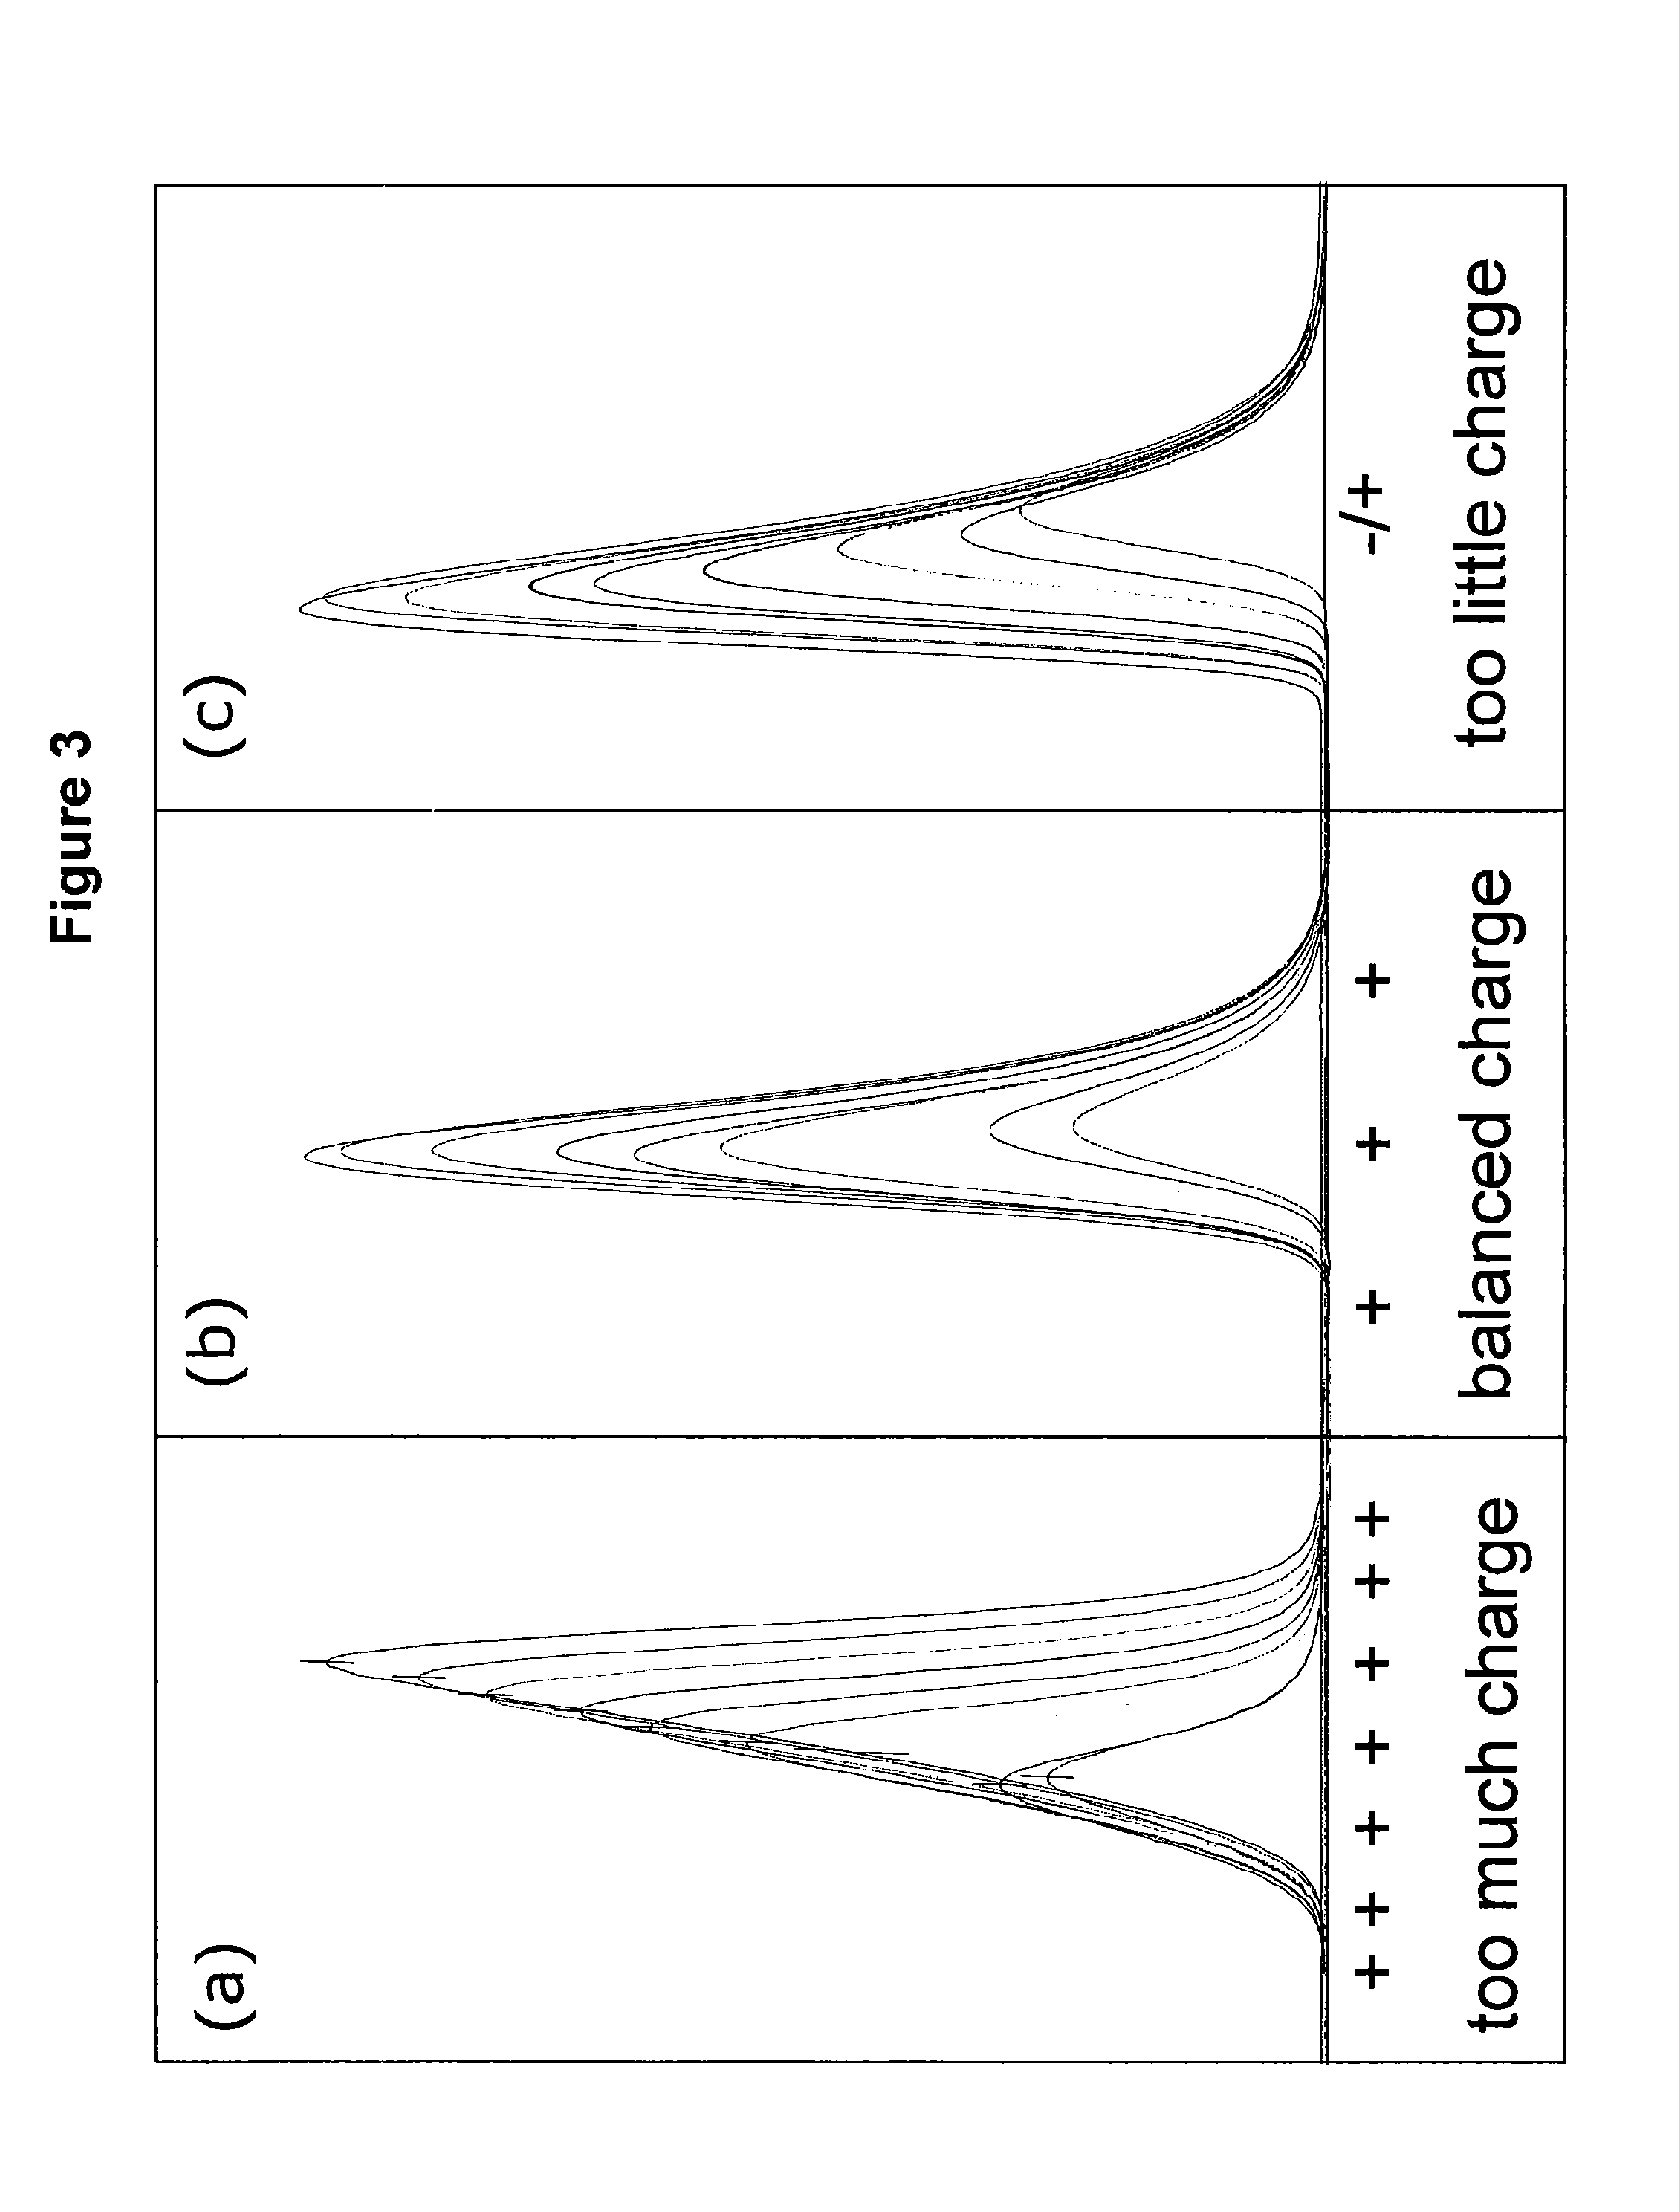 High purity chromatographic materials comprising an ionizable modifier